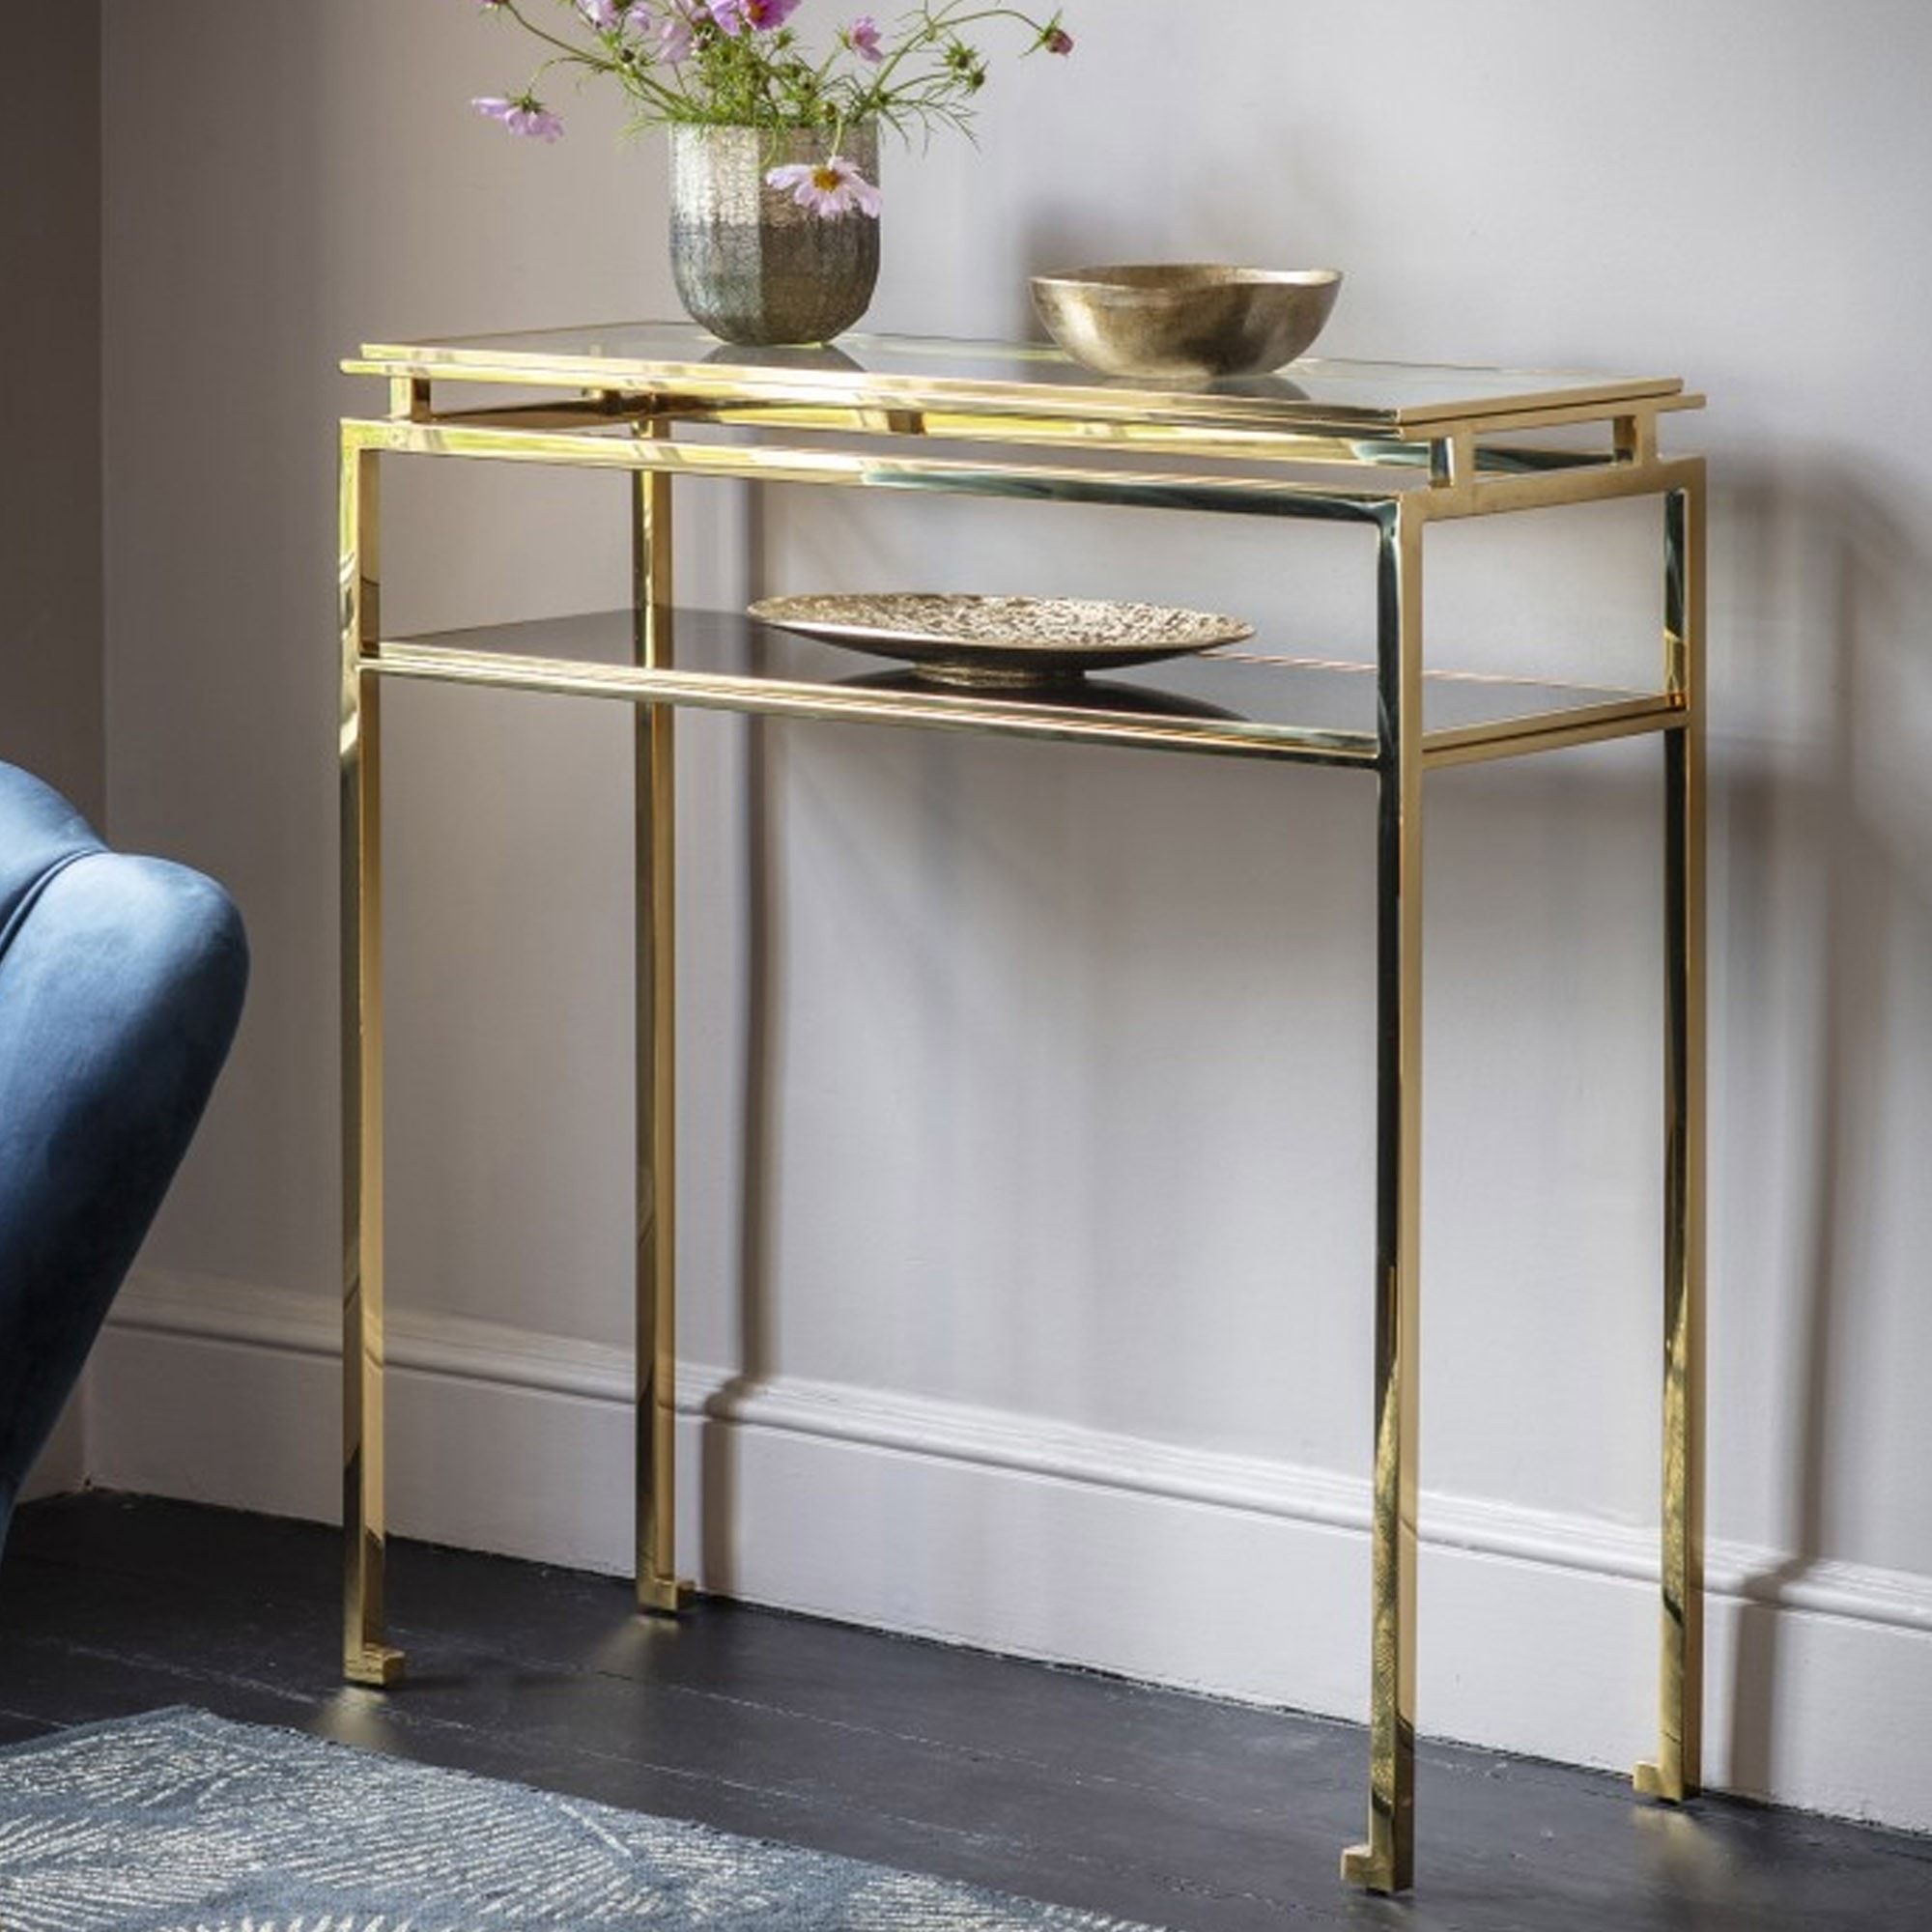 Cosenza Console Table Gold | Gold Console Table | Glass Console Table With Regard To Glass And Pewter Console Tables (View 18 of 20)